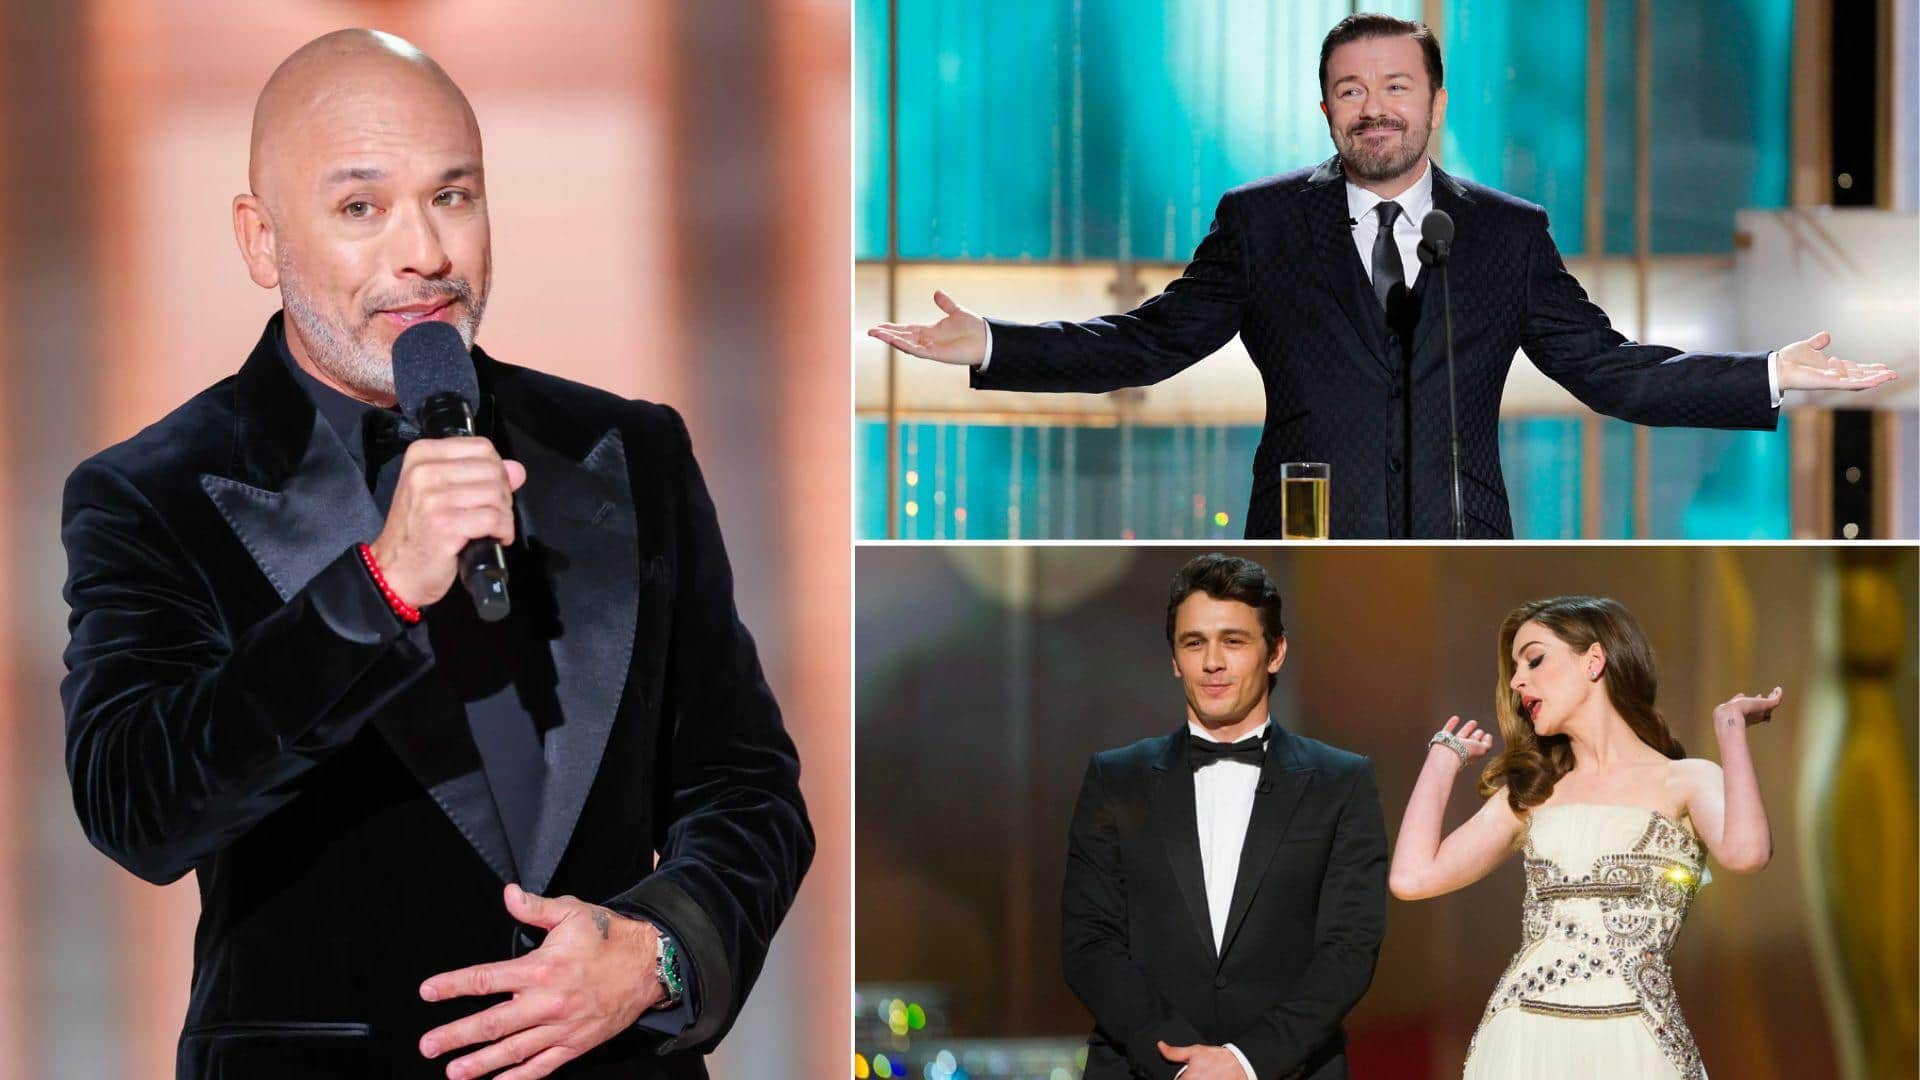 Weird to wild: Hollywood hosts, jokes that crossed the line